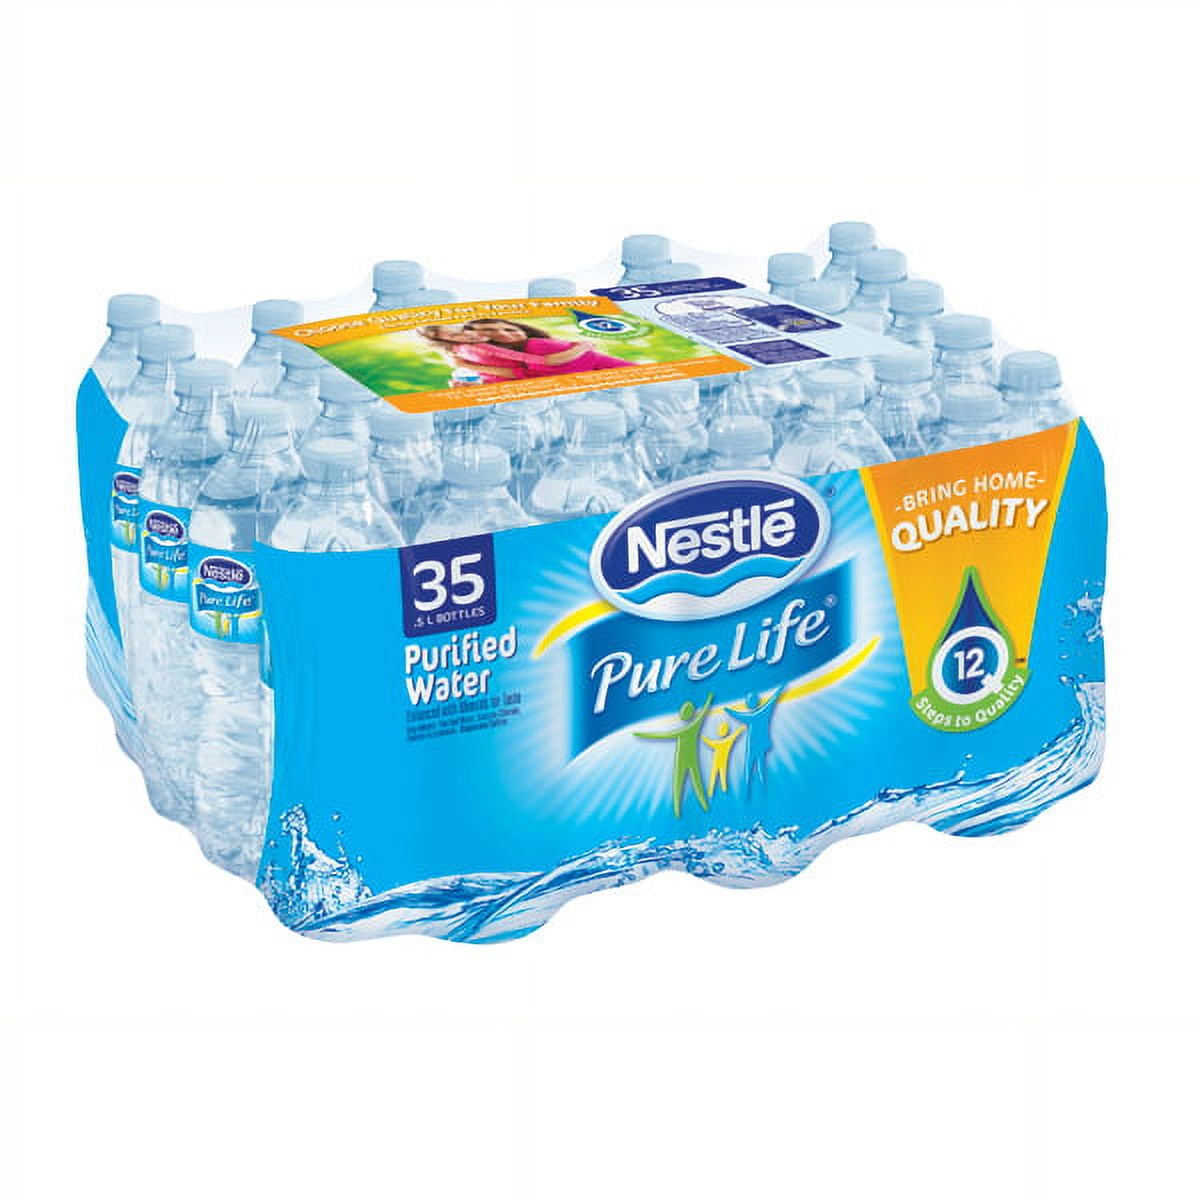 Namthip Drinking Water Size 1.5L Pack of 6 bottles — Shopping-D